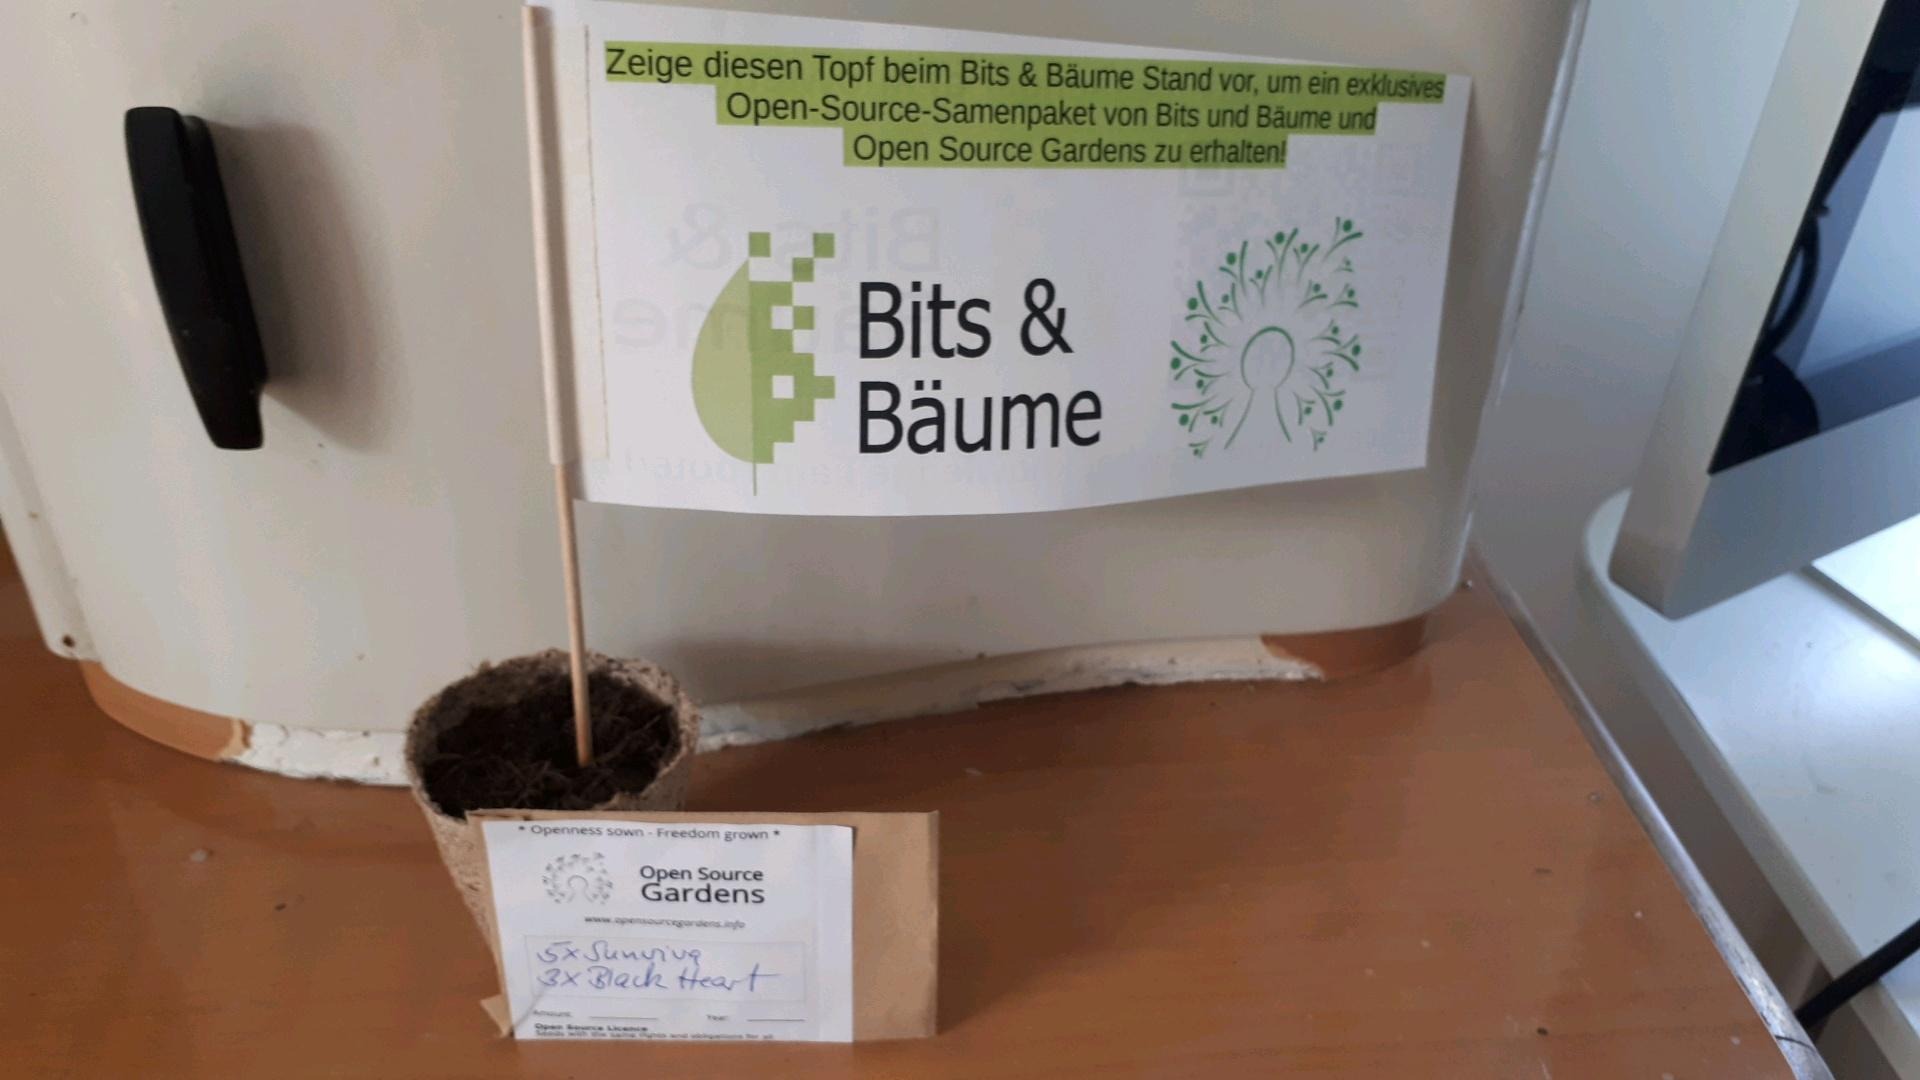 The picture shows a seedbag with open Source Seeds and a flag with an OSG logo and a logo of Bits&Trees as part of a game in which you get seeds if you find the flag. 